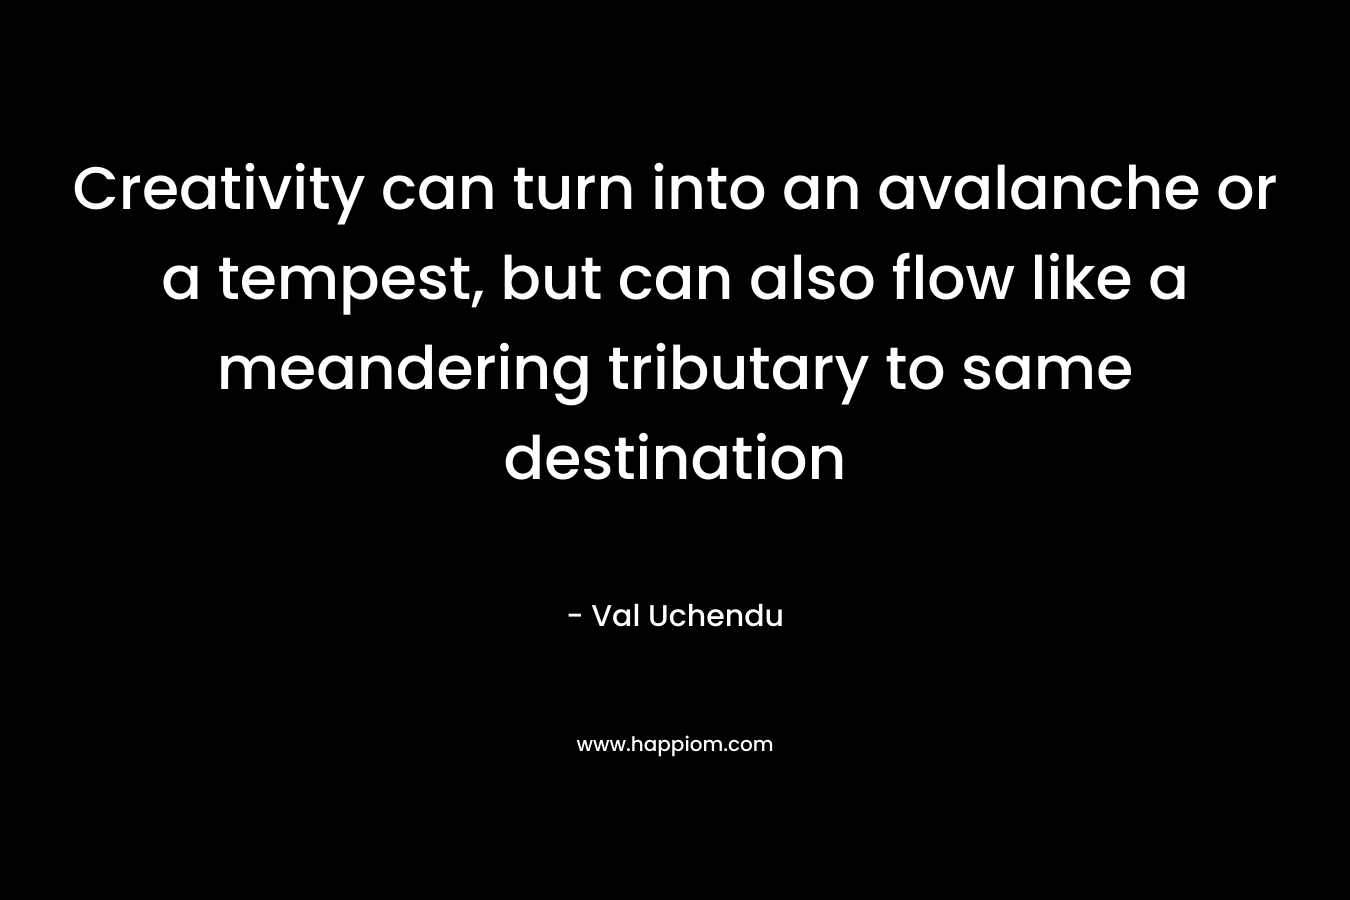 Creativity can turn into an avalanche or a tempest, but can also flow like a meandering tributary to same destination – Val Uchendu